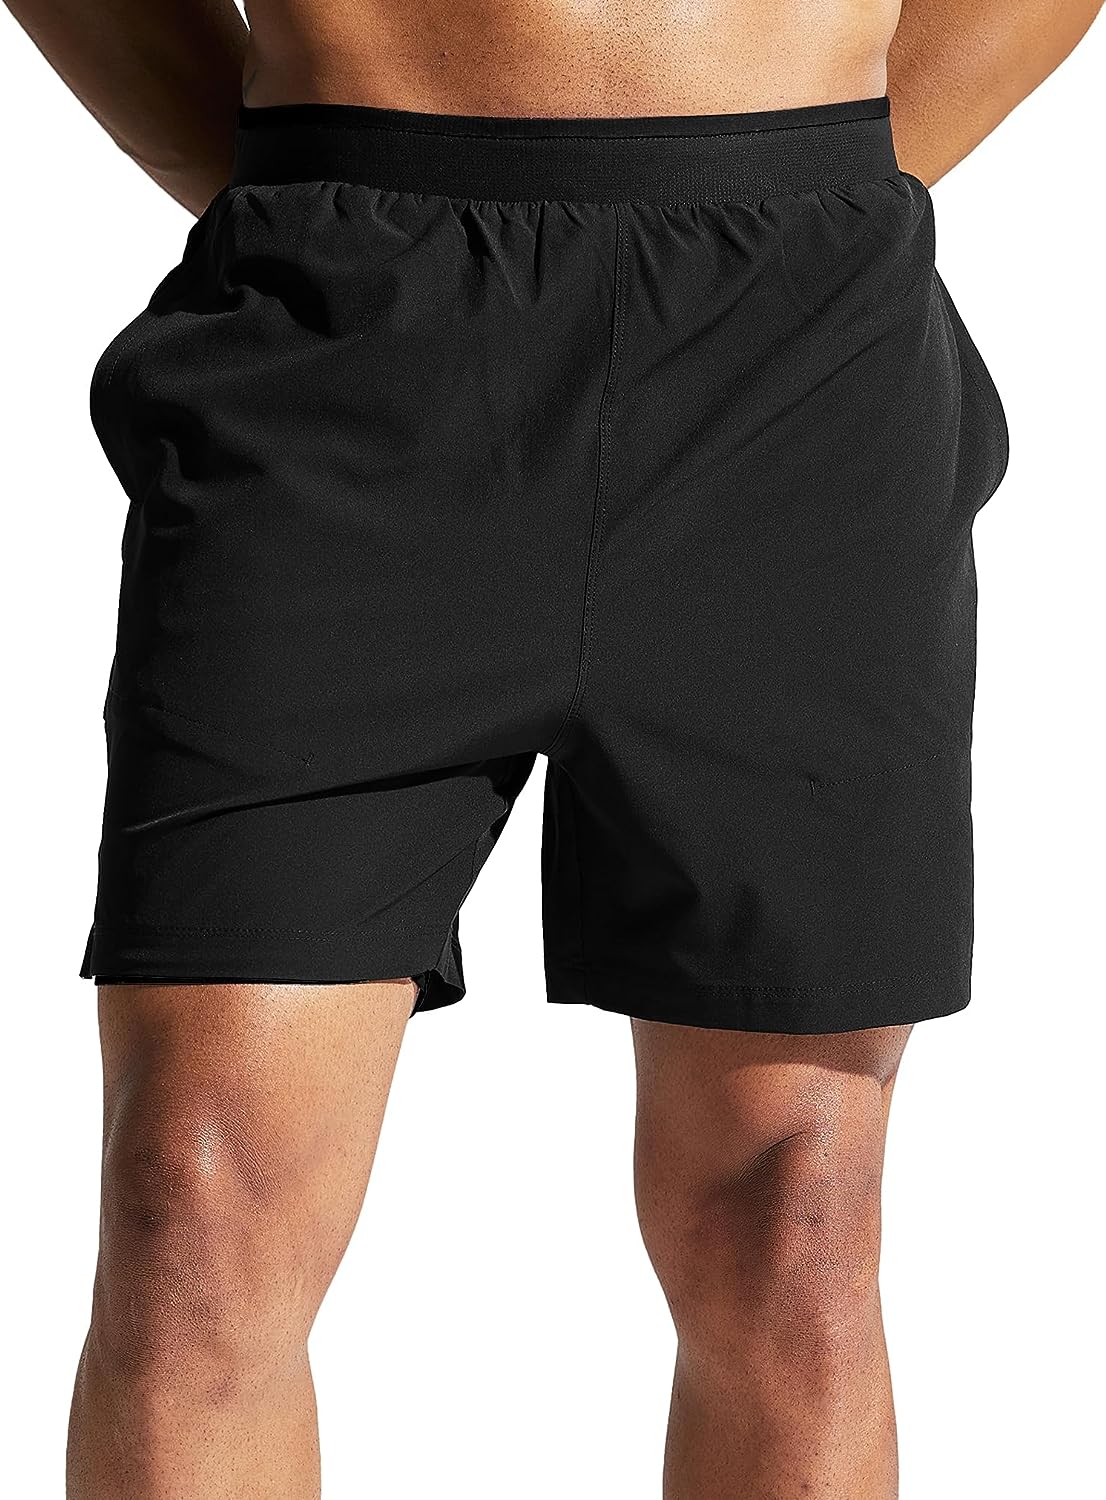 MIER Men‘s 3 Inches Quick Dry Running Shorts with Liner